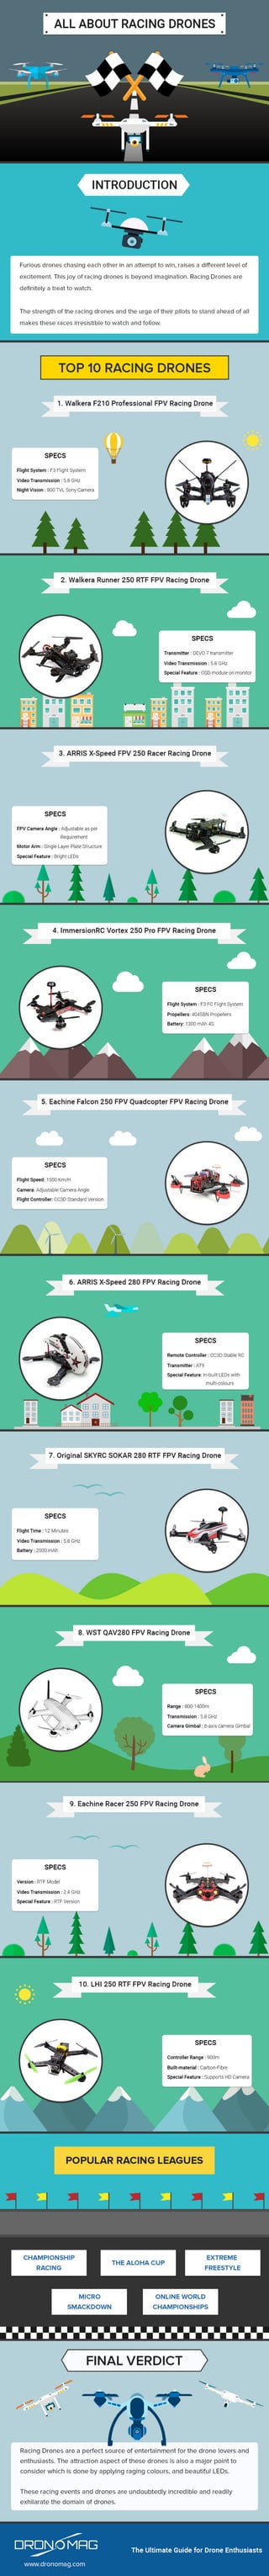 All about racing drones